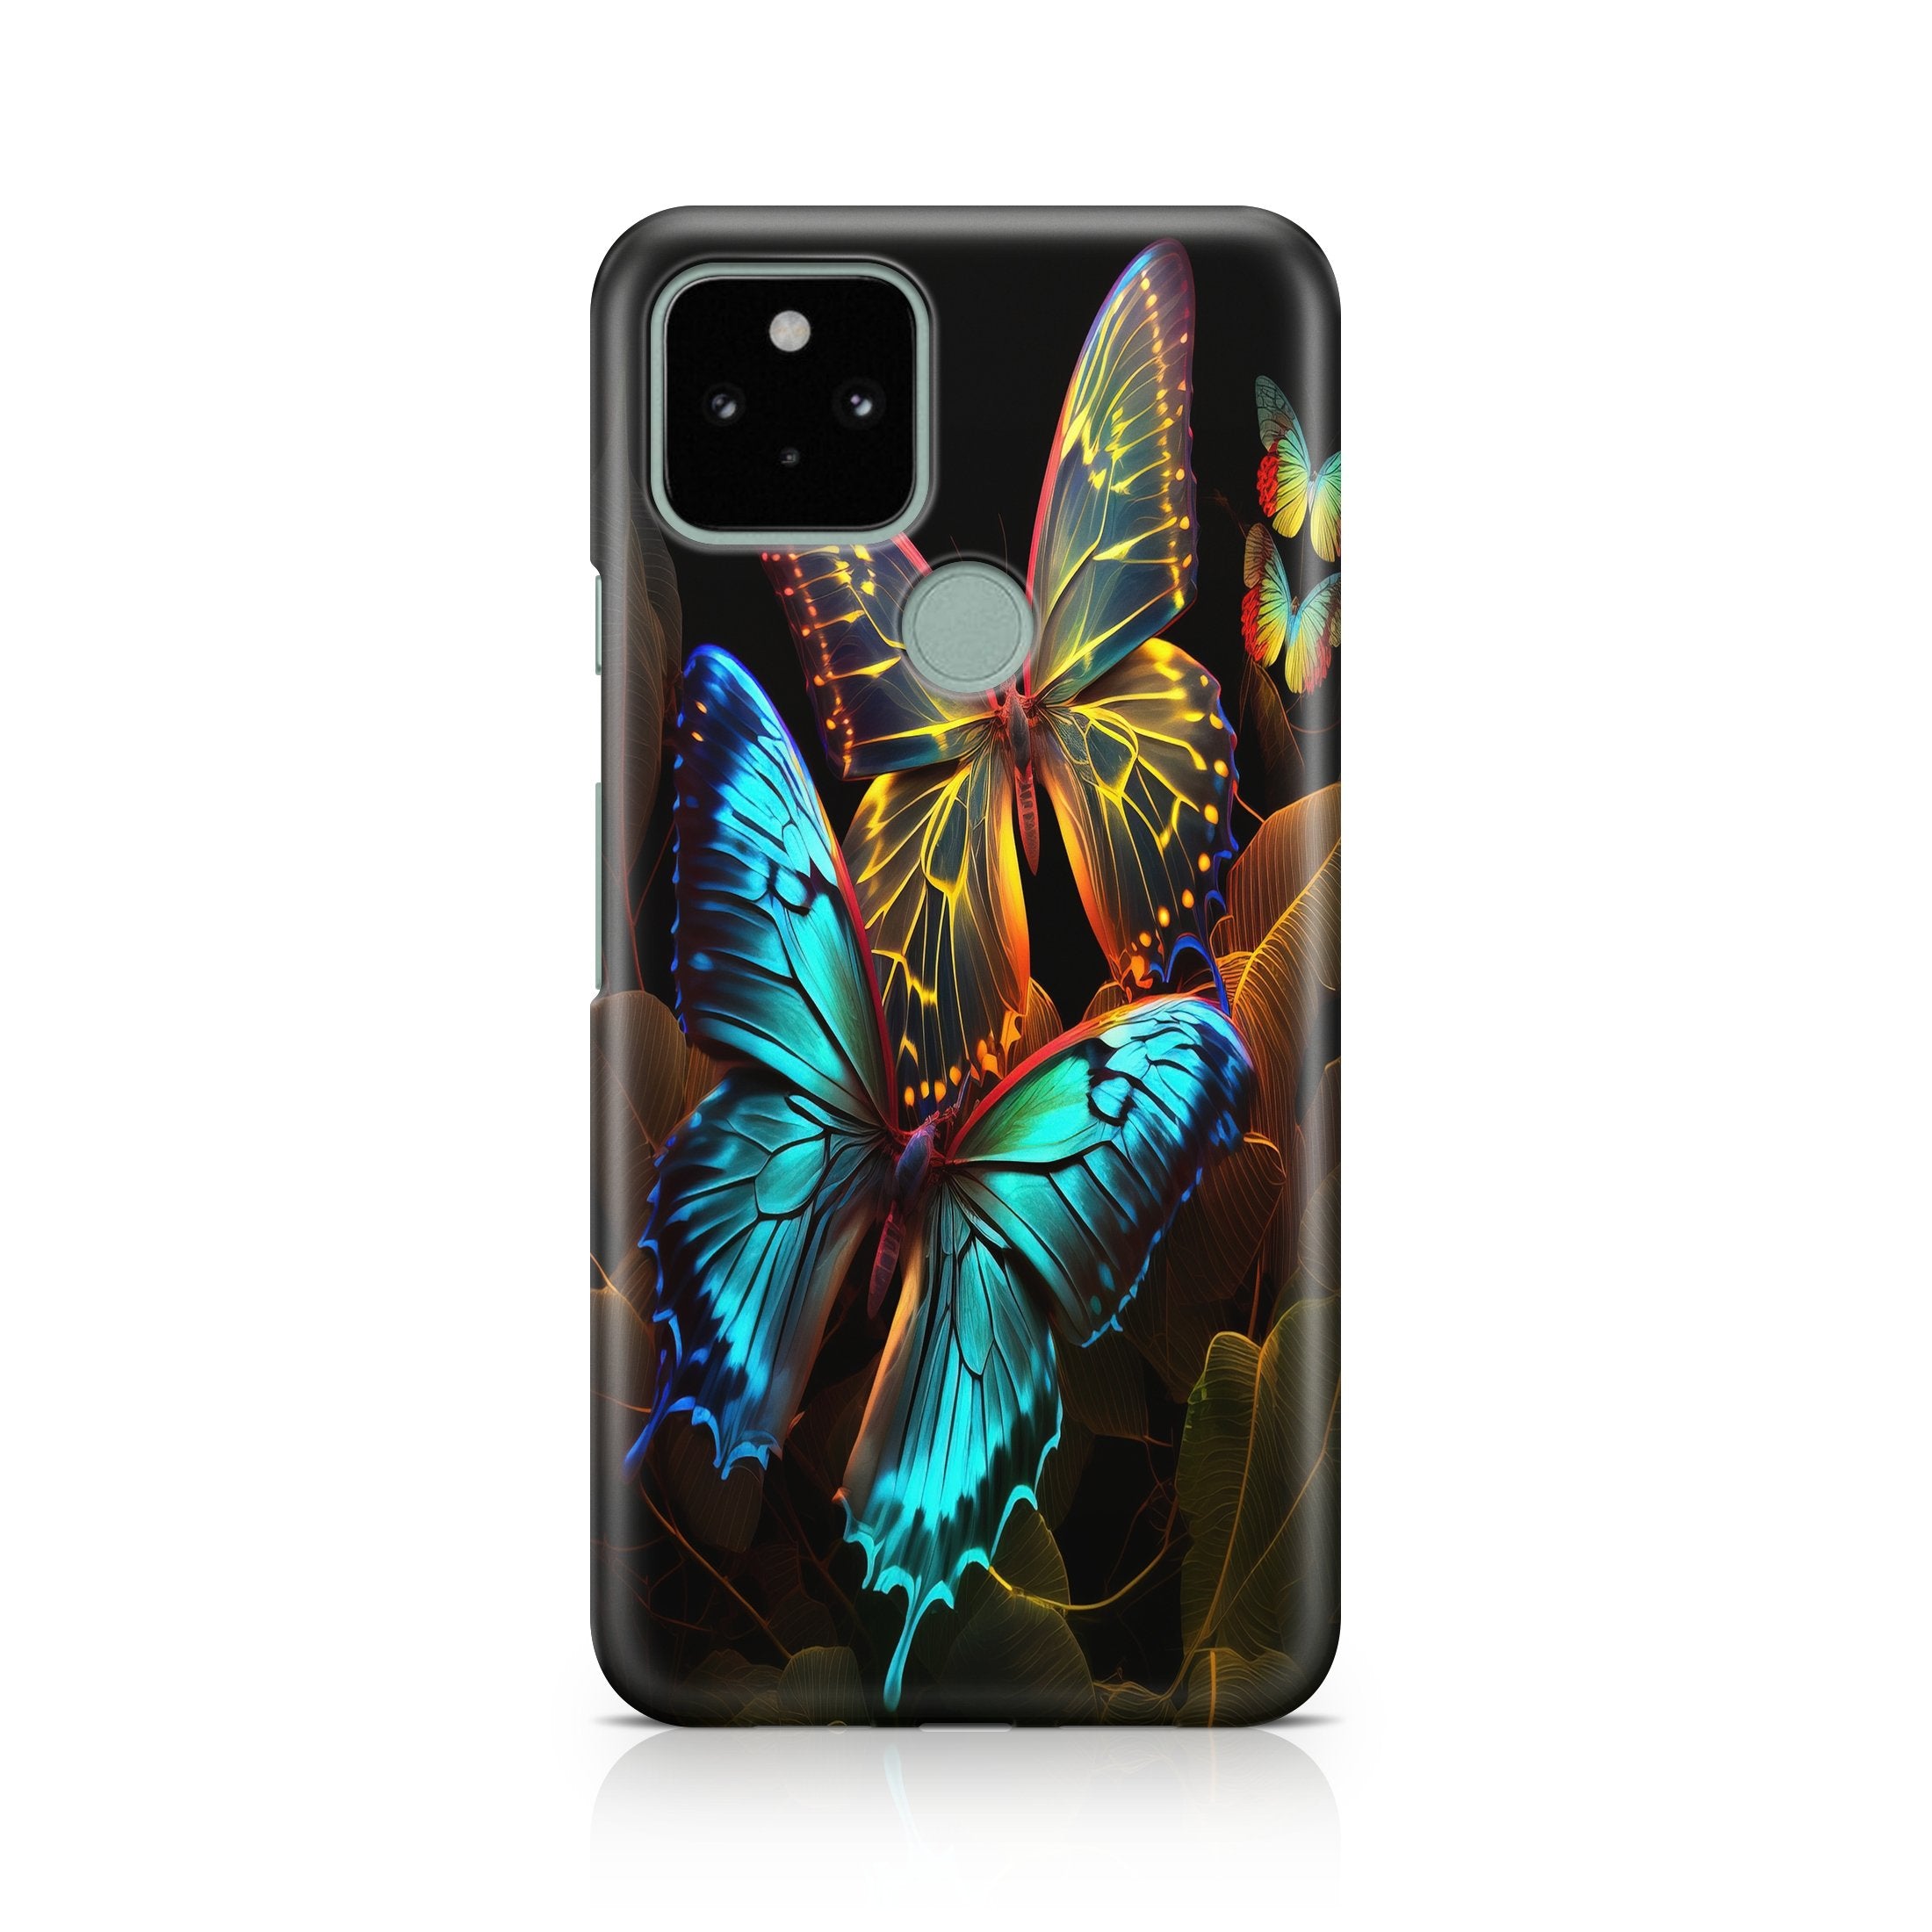 Specter Butterflies - Google phone case designs by CaseSwagger